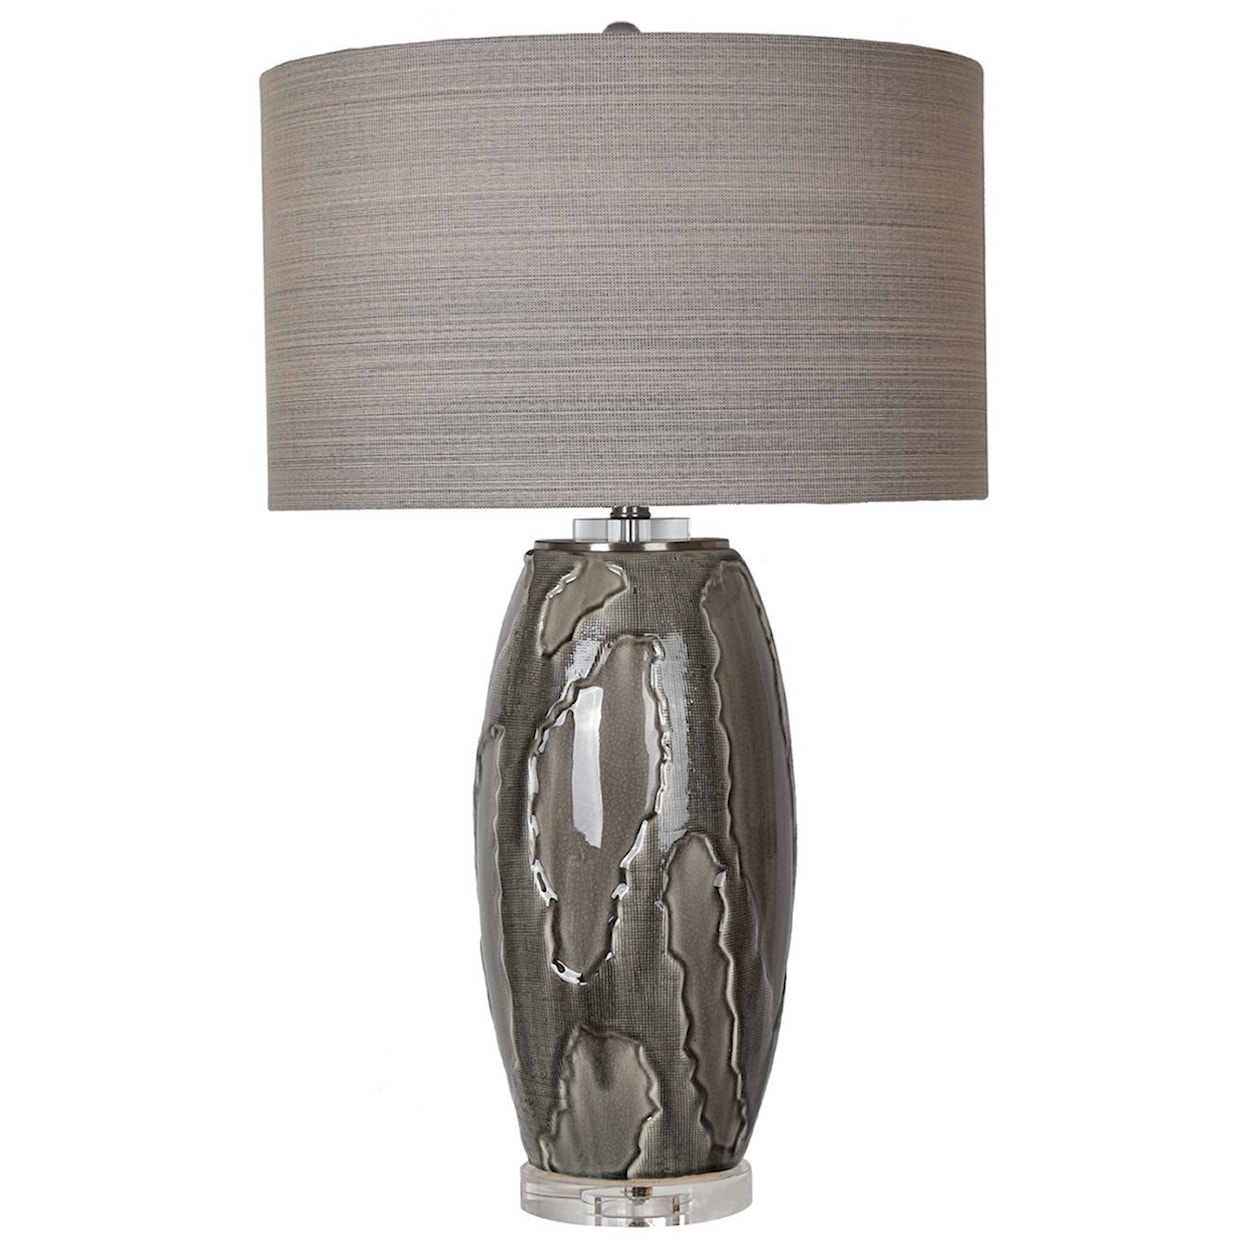 Crestview Collection Lighting Pompe Table Lamp